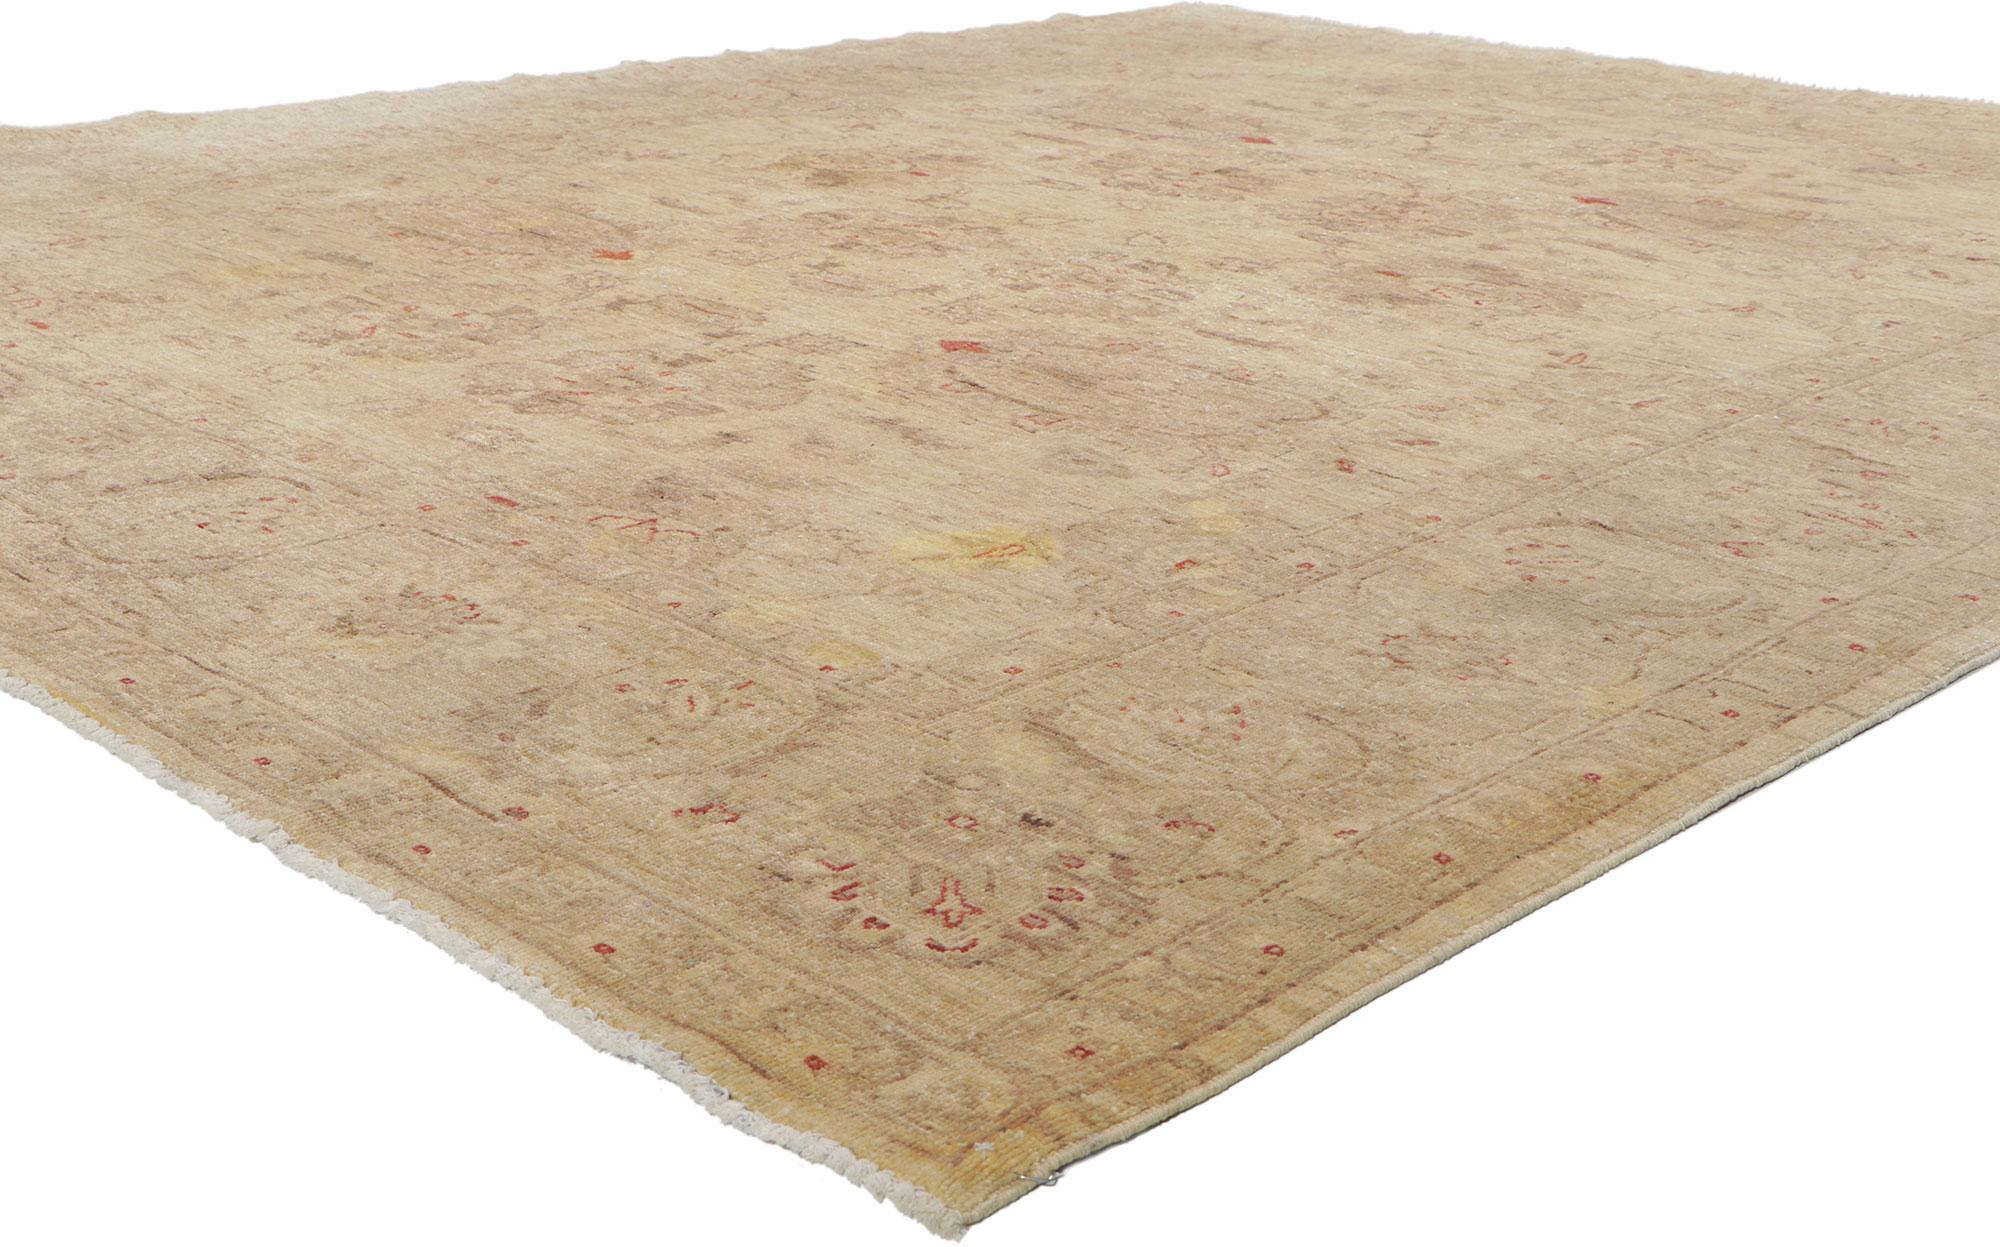 ​78343 Vintage Indian Peshawar Rug, 07'10 x 09'07.
​Experience the perfect blend of quiet sophistication and timeless appeal with our hand-knotted wool vintage Indian Peshawar rug. Crafted with meticulous care, this exquisite piece showcases a faded